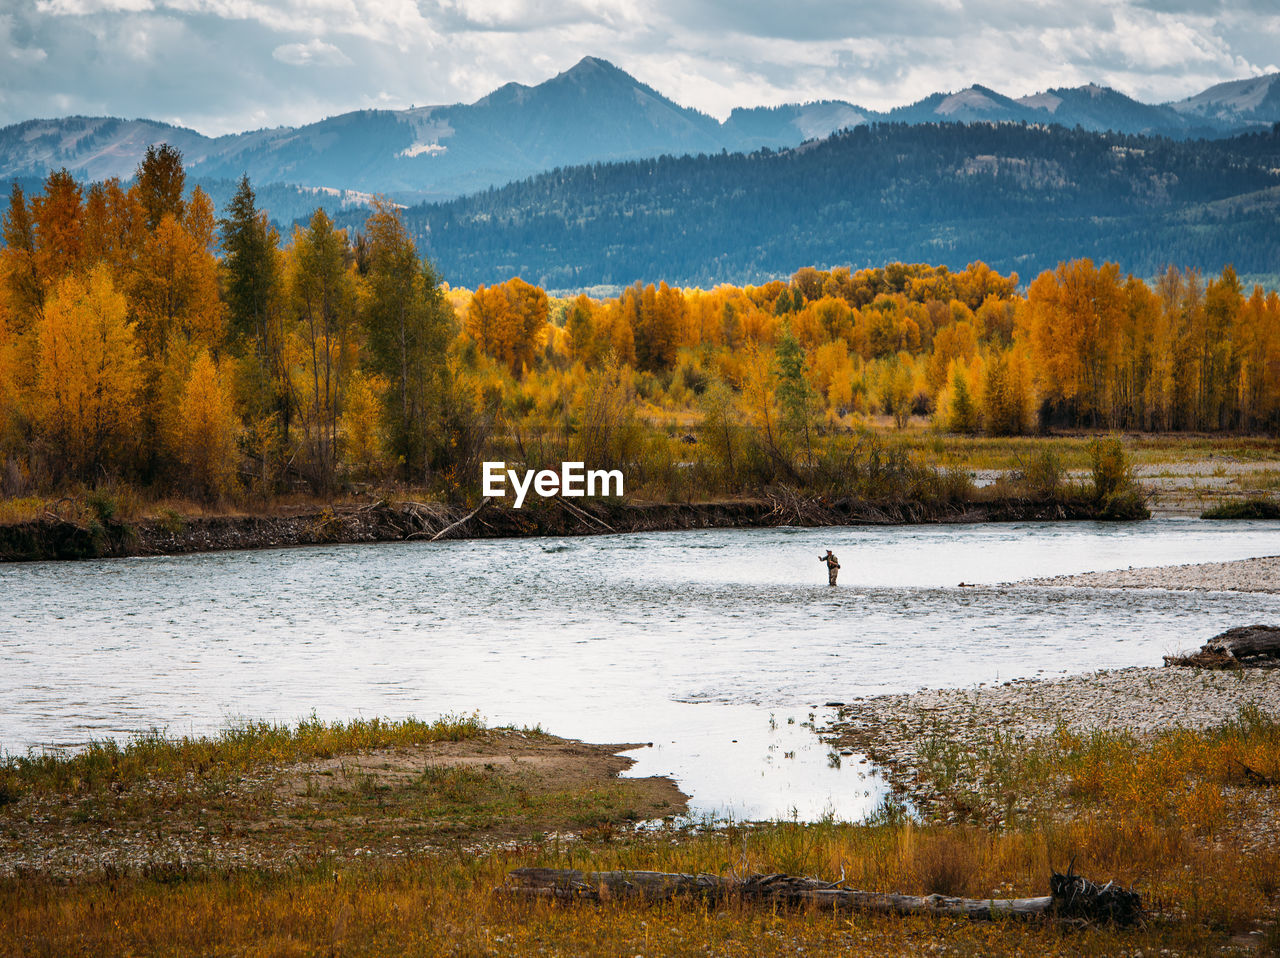 A fly fisherman casts in the snake river during fall in wyoming